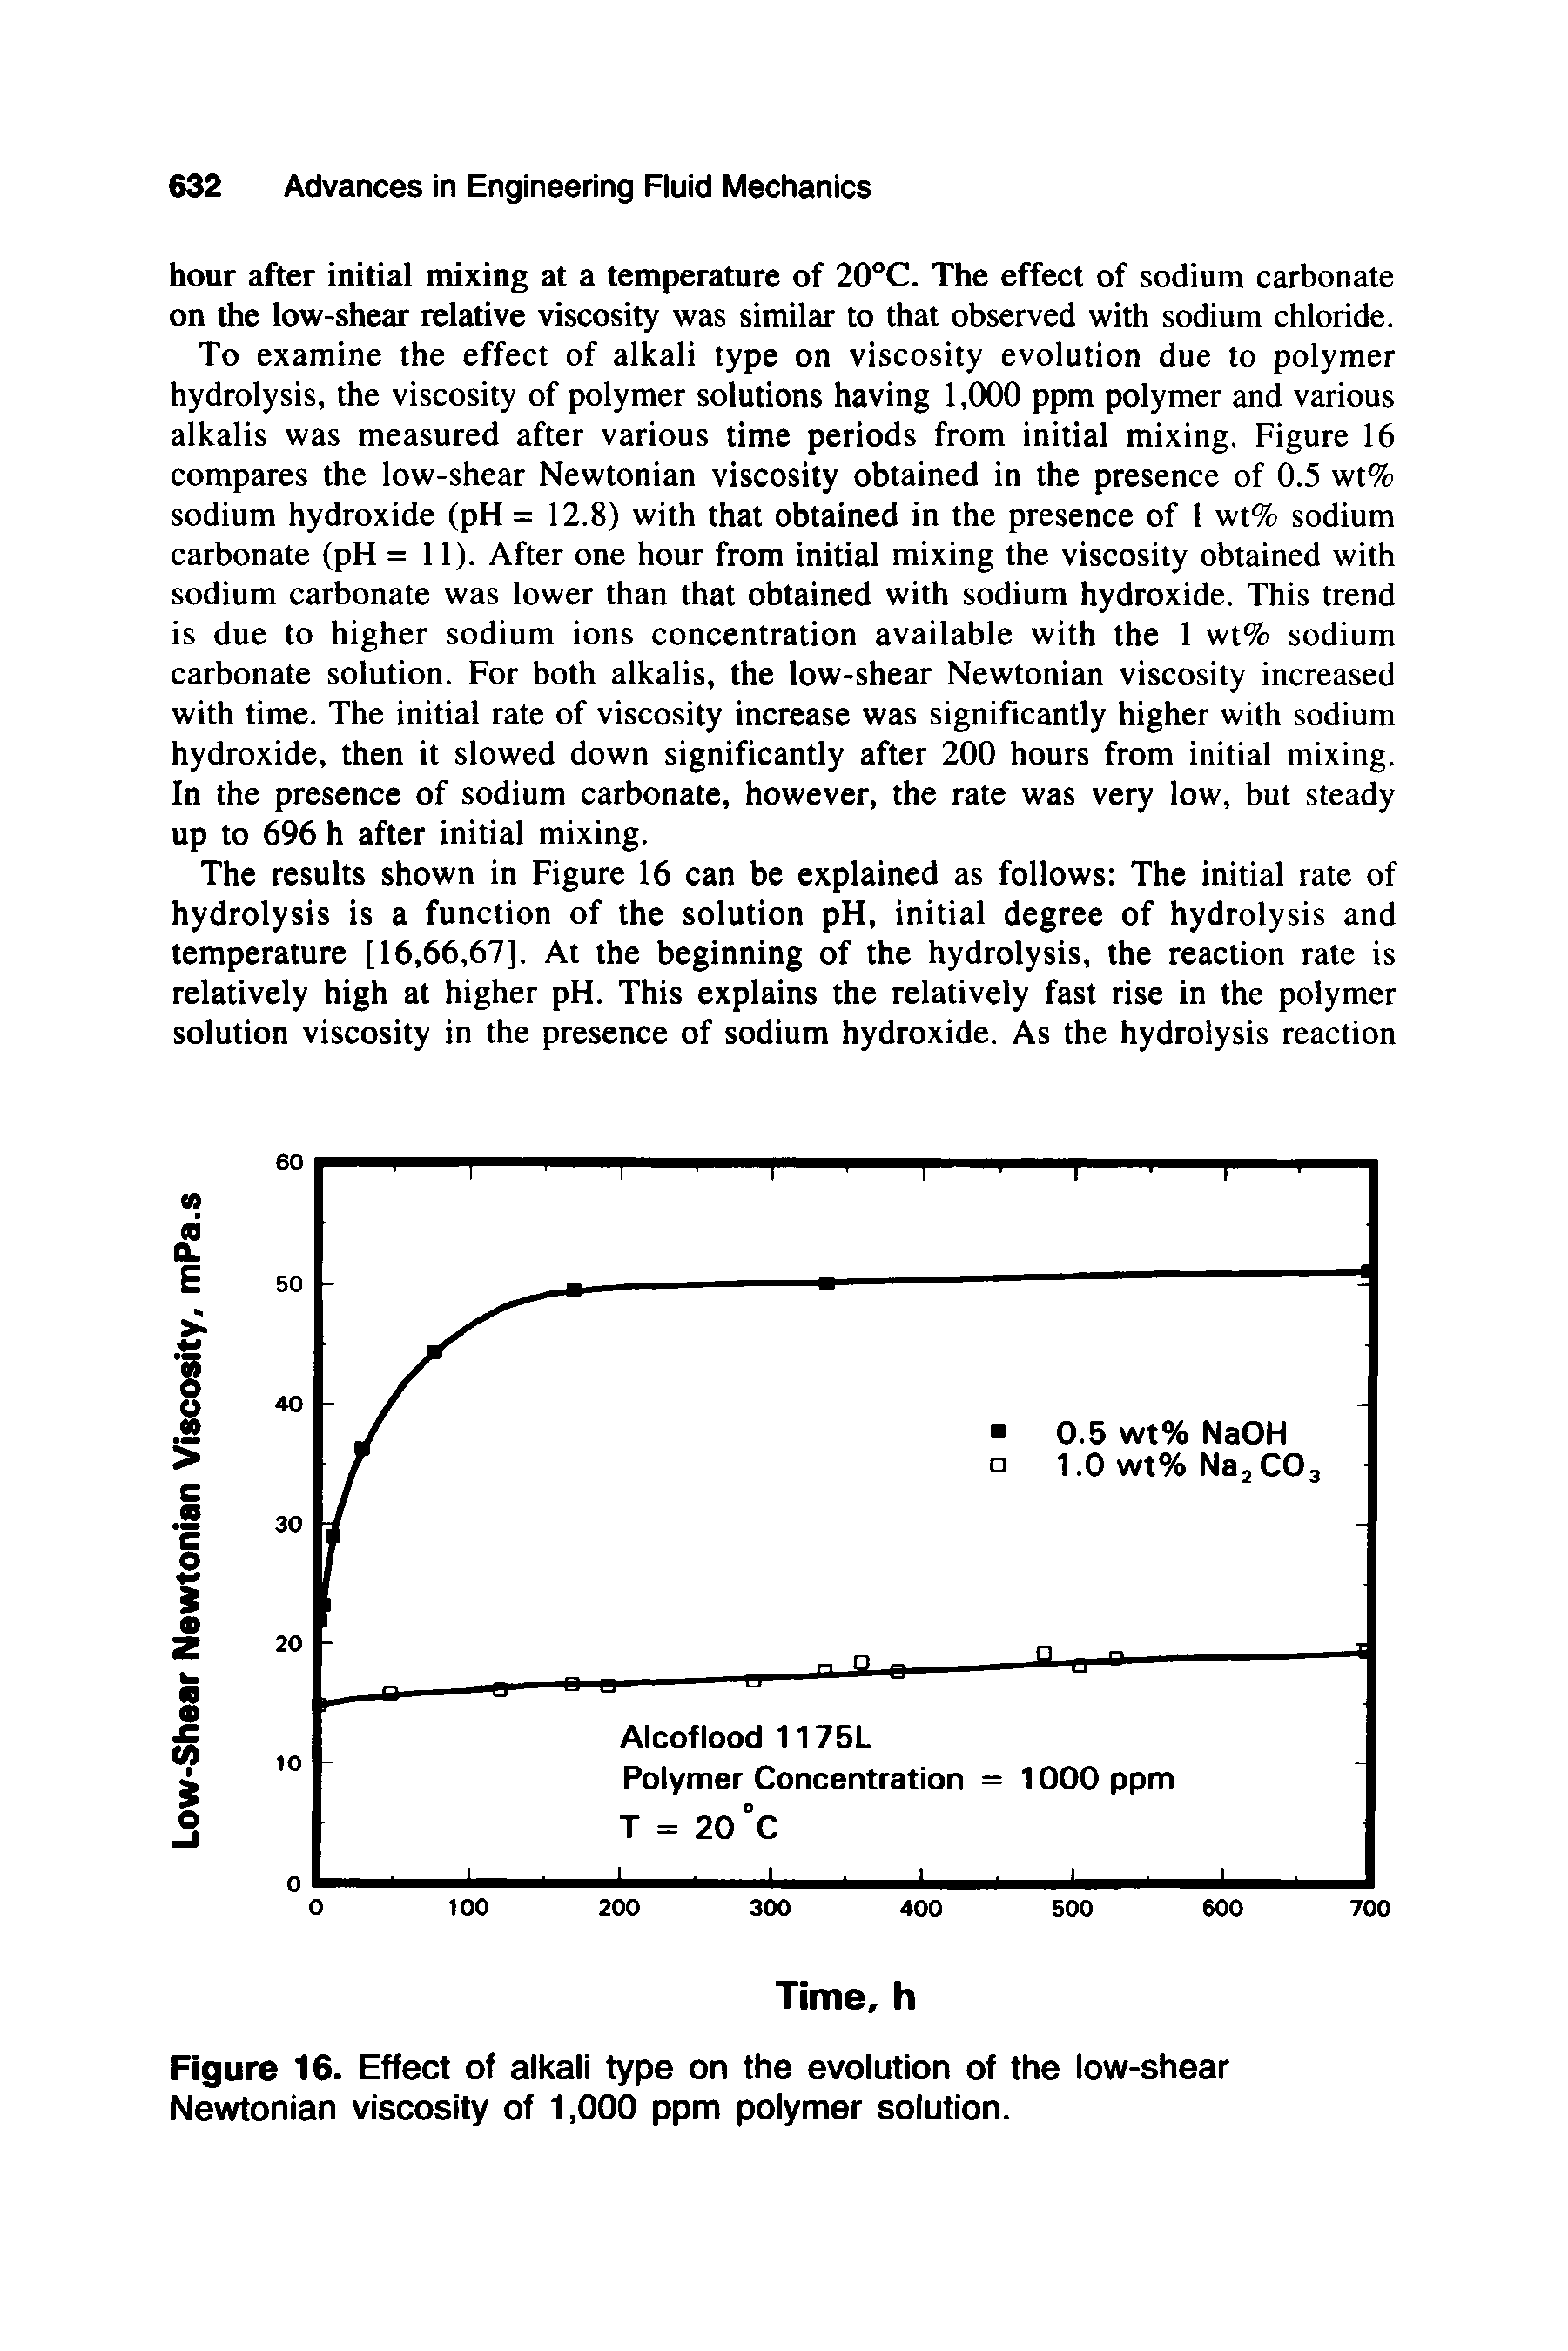 Figure 16. Effect of alkali type on the evolution of the low-shear Newtonian viscosity of 1,000 ppm polymer solution.